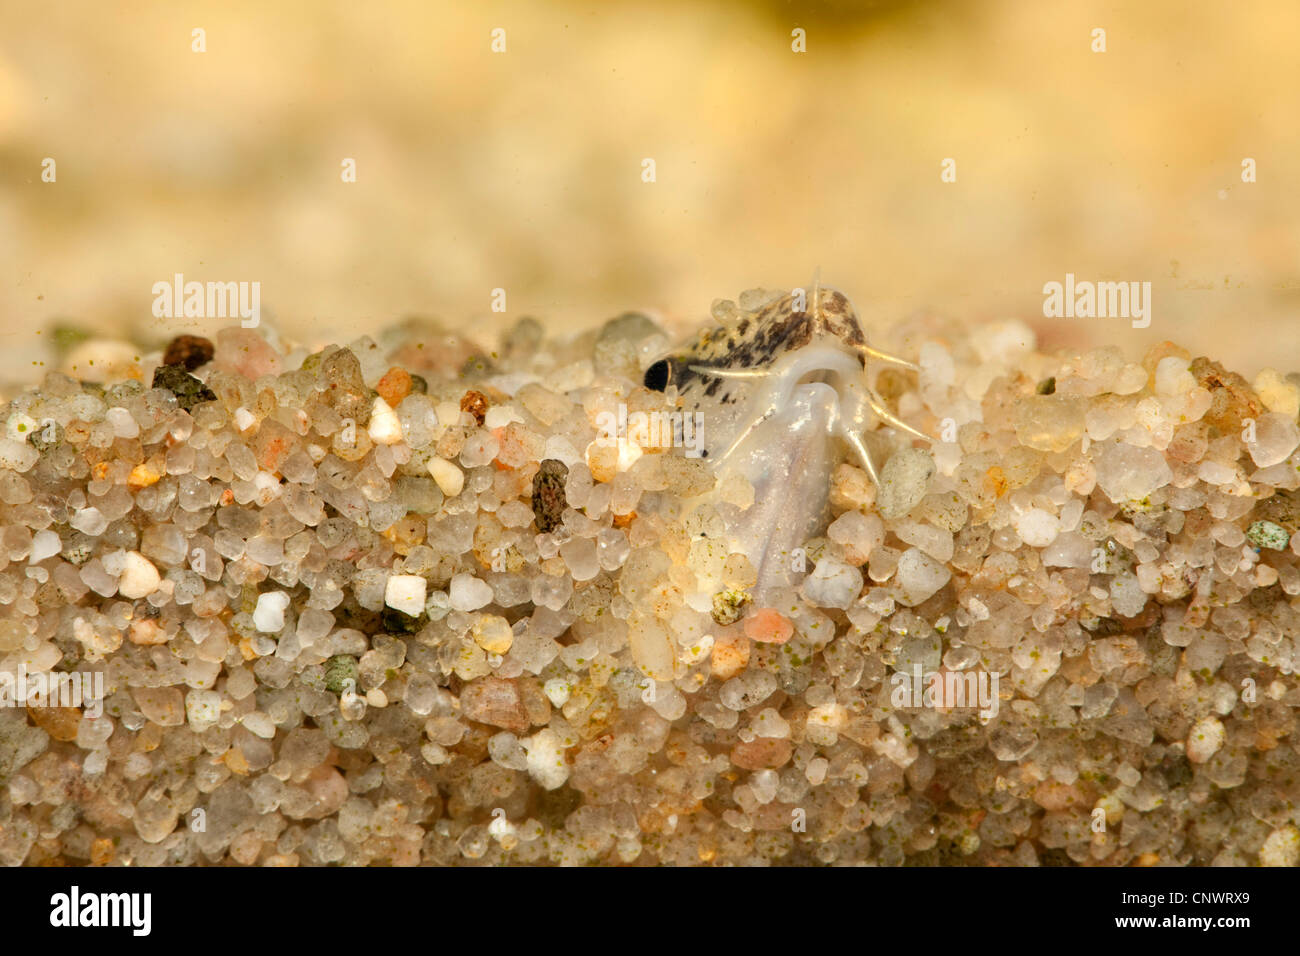 golden loach (Cobitis aurata), fish dug into sand ground with the mouth sticking out Stock Photo